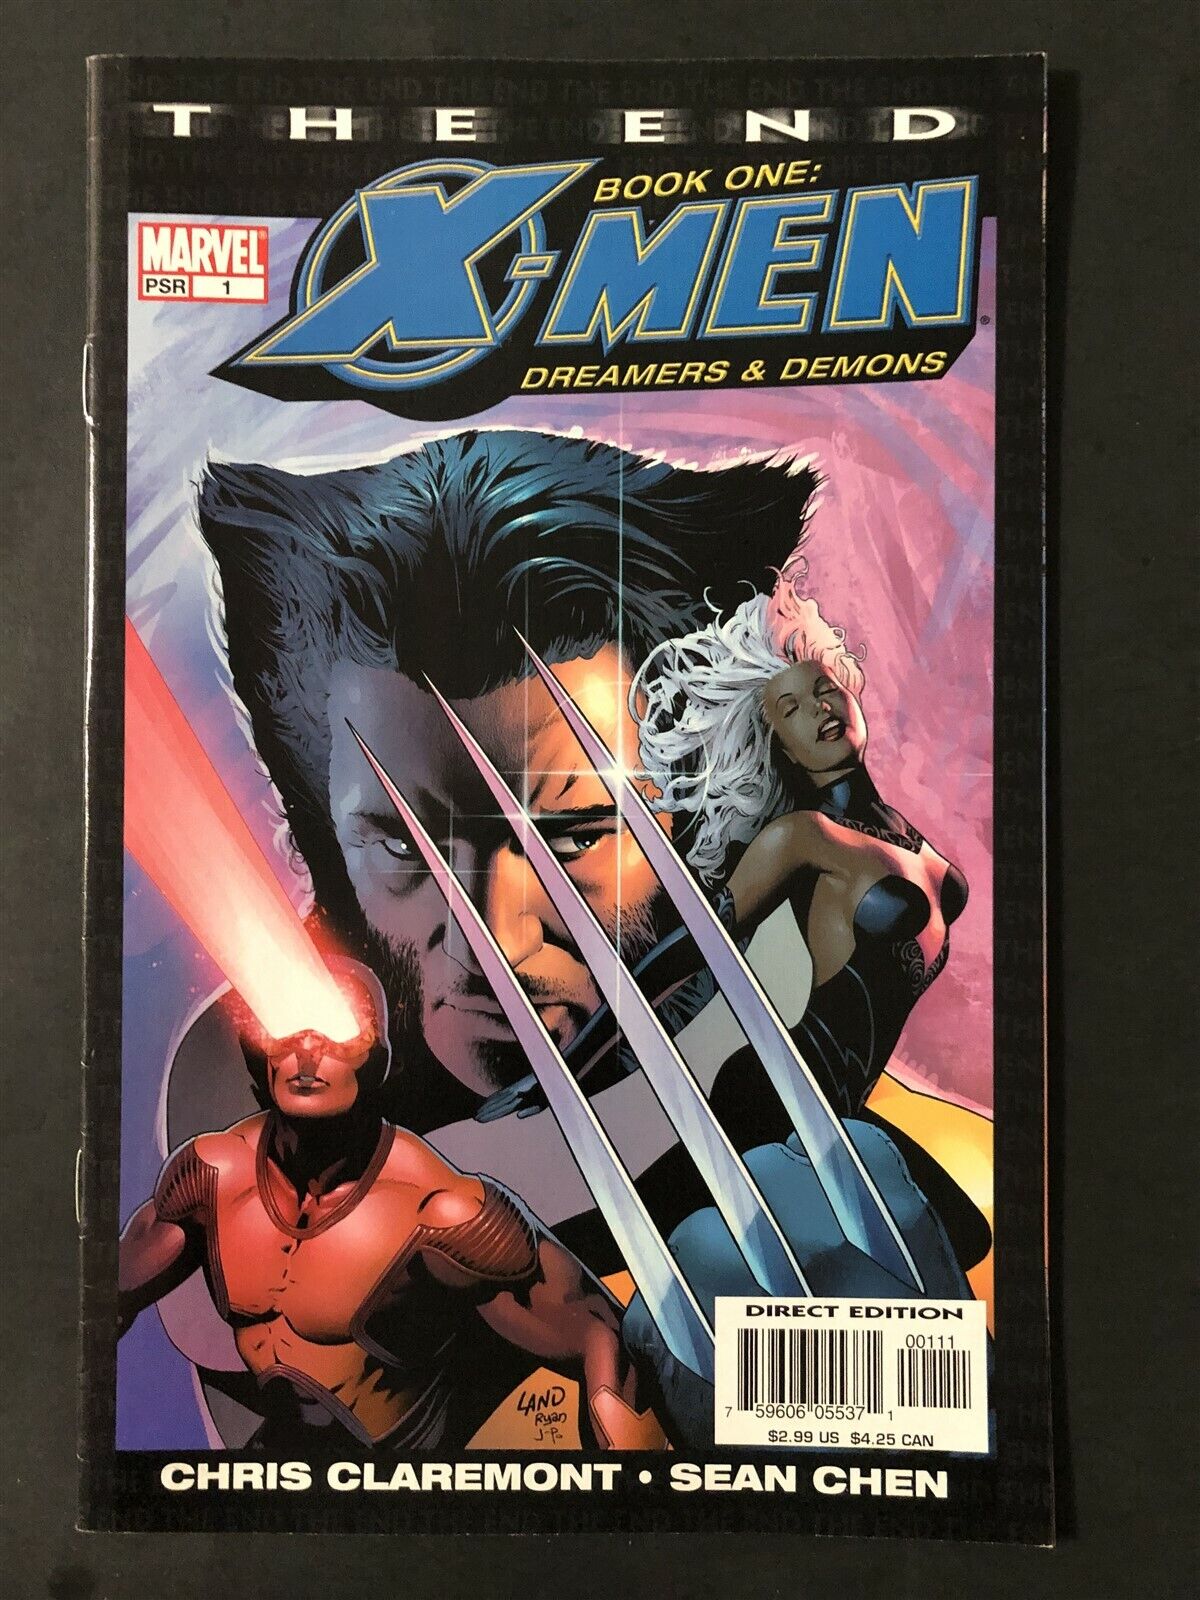 Marvel Comics X-Men The End Book One Dreamers & Demons #1 (2004)